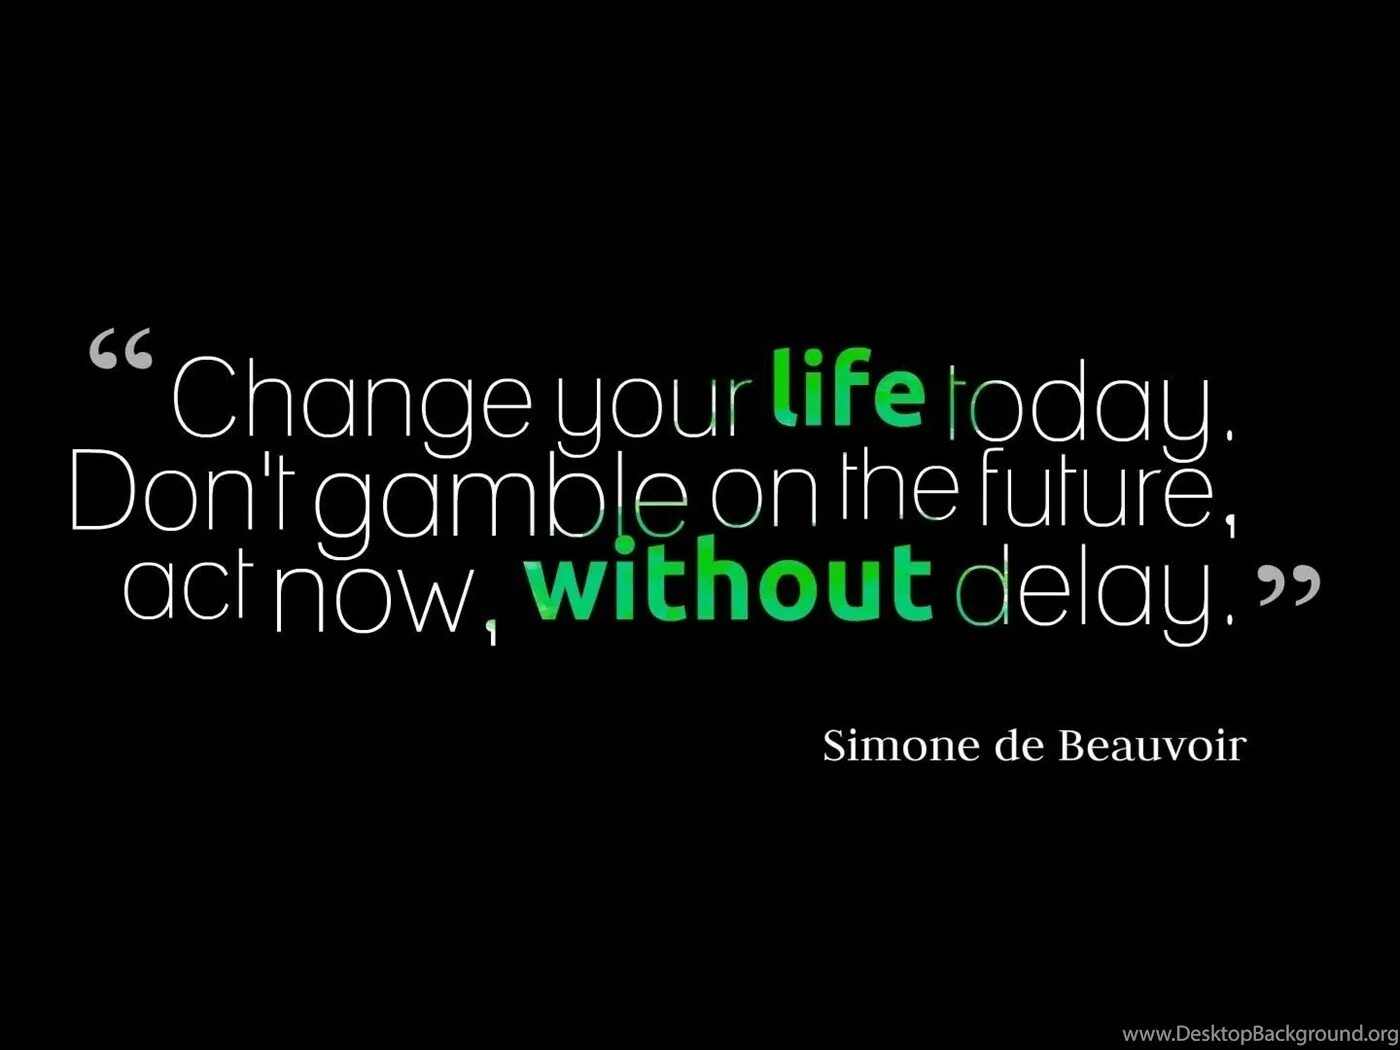 Change your Life today. Лайф Тудей. Act Now. Without delay